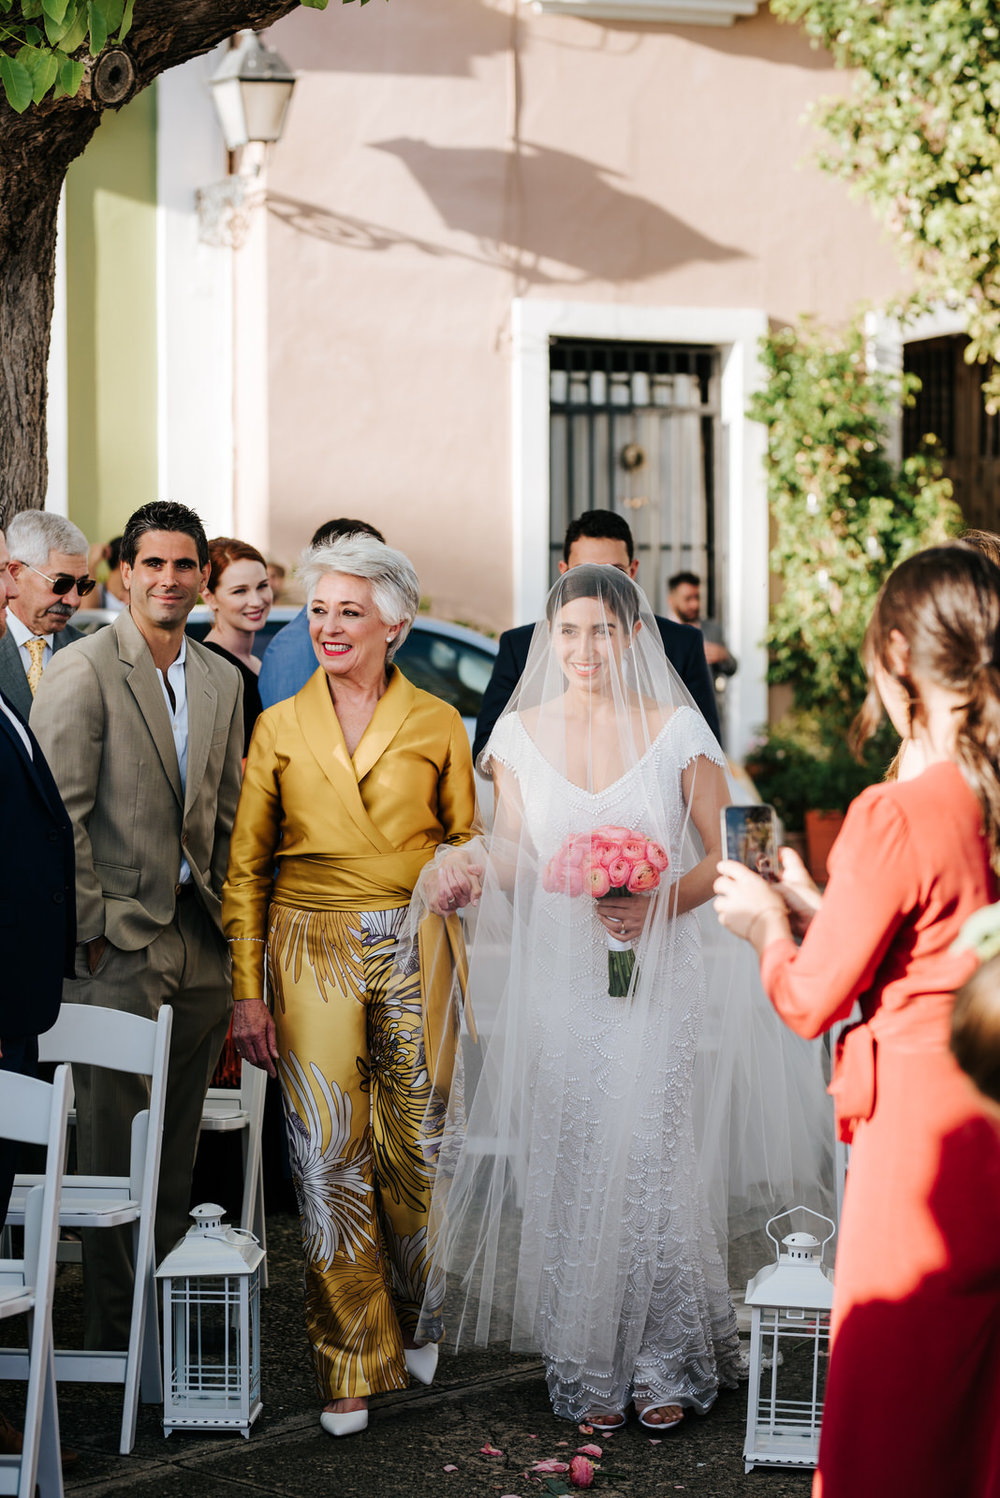  Bride and her mother walk down the wedding aisle as they smile and exchange glances with guests during this wedding in Old San Juan Puerto Rico 